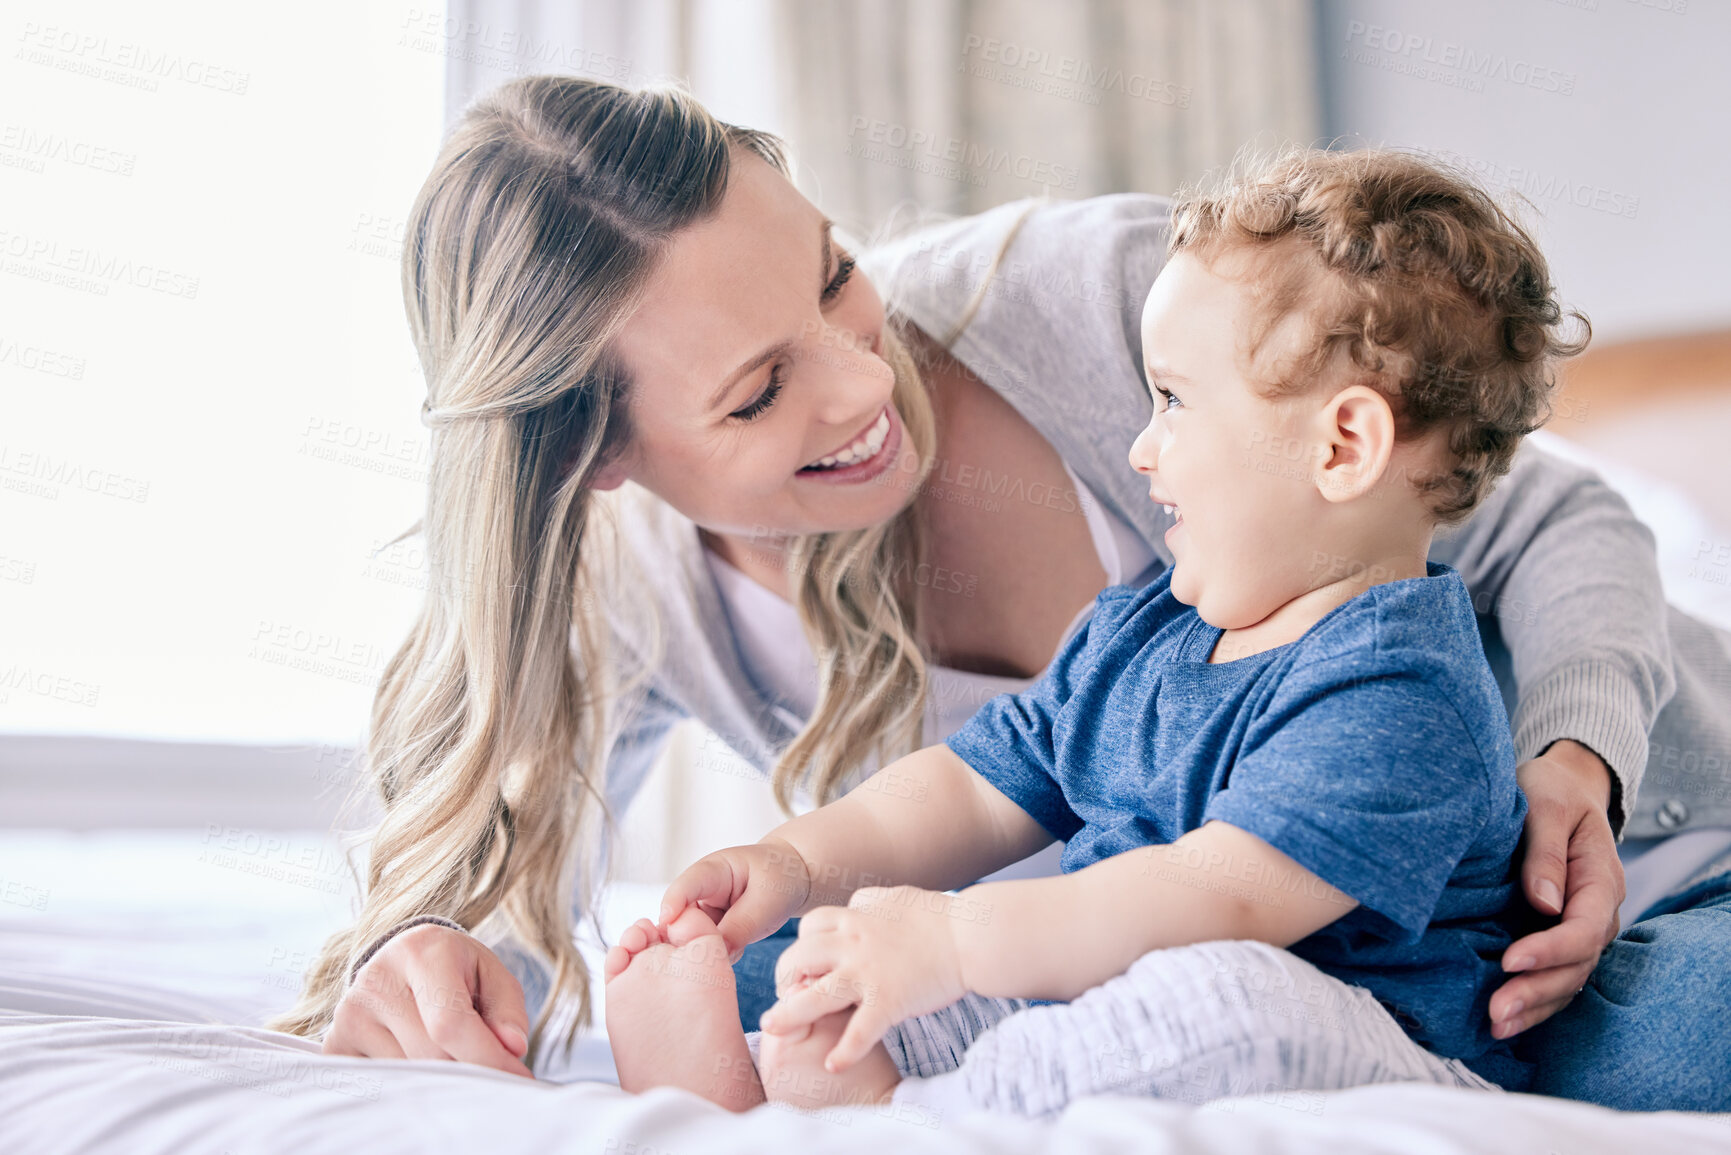 Buy stock photo Shot of a mom bonding with her adorable baby boy at home